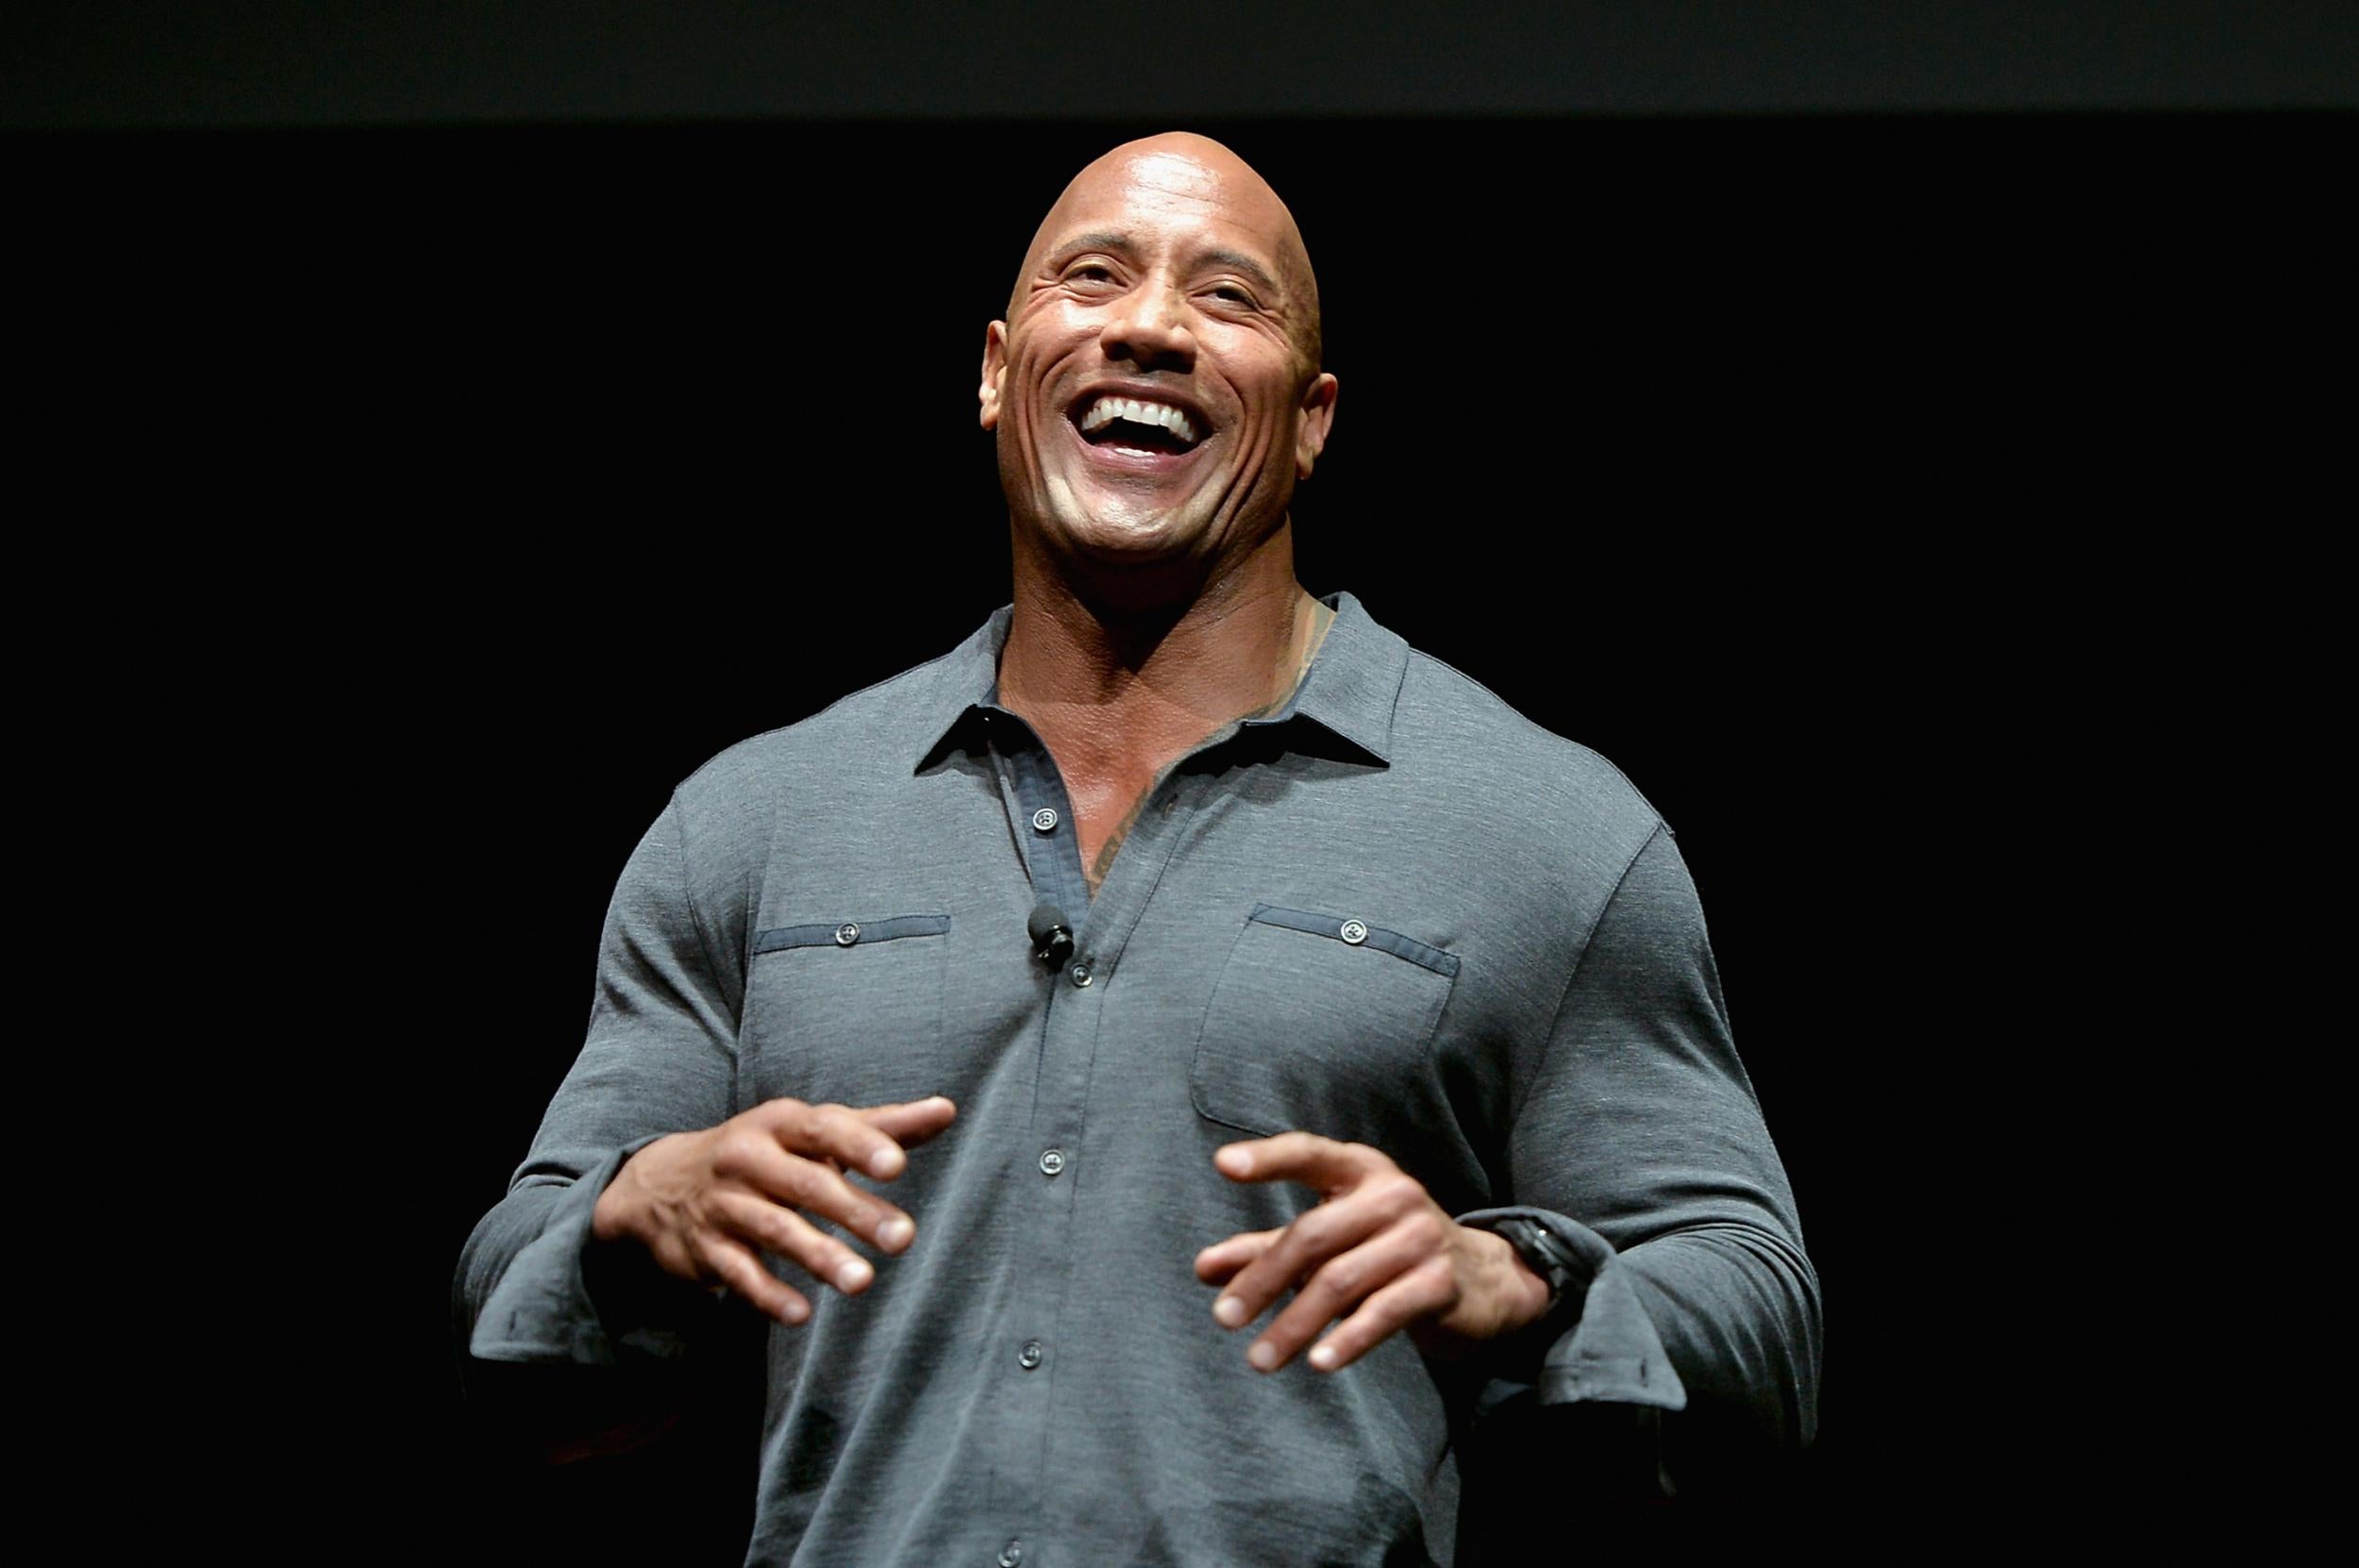 Dwayne Johnson: The Rock says support he received after revealing depression battle has been 'overwhelming'